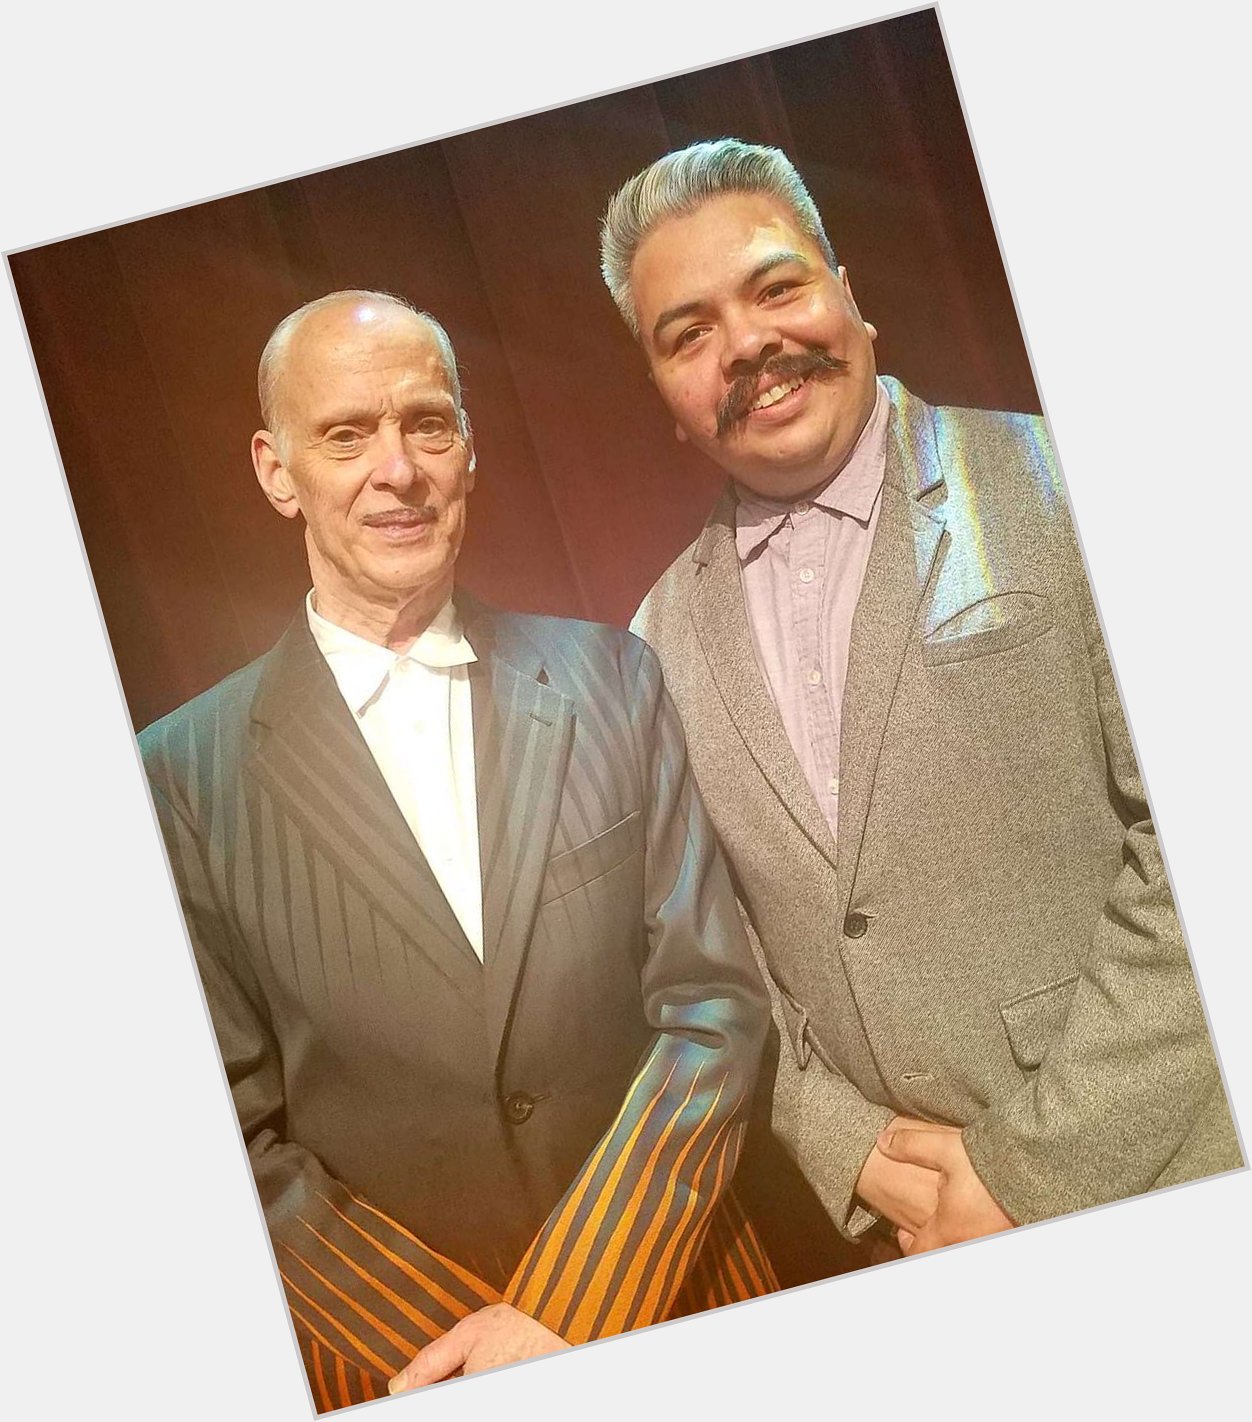 Happy birthday to THE filth elder, my close personal friend* John Waters!

(*nice person I hosted an event for once) 